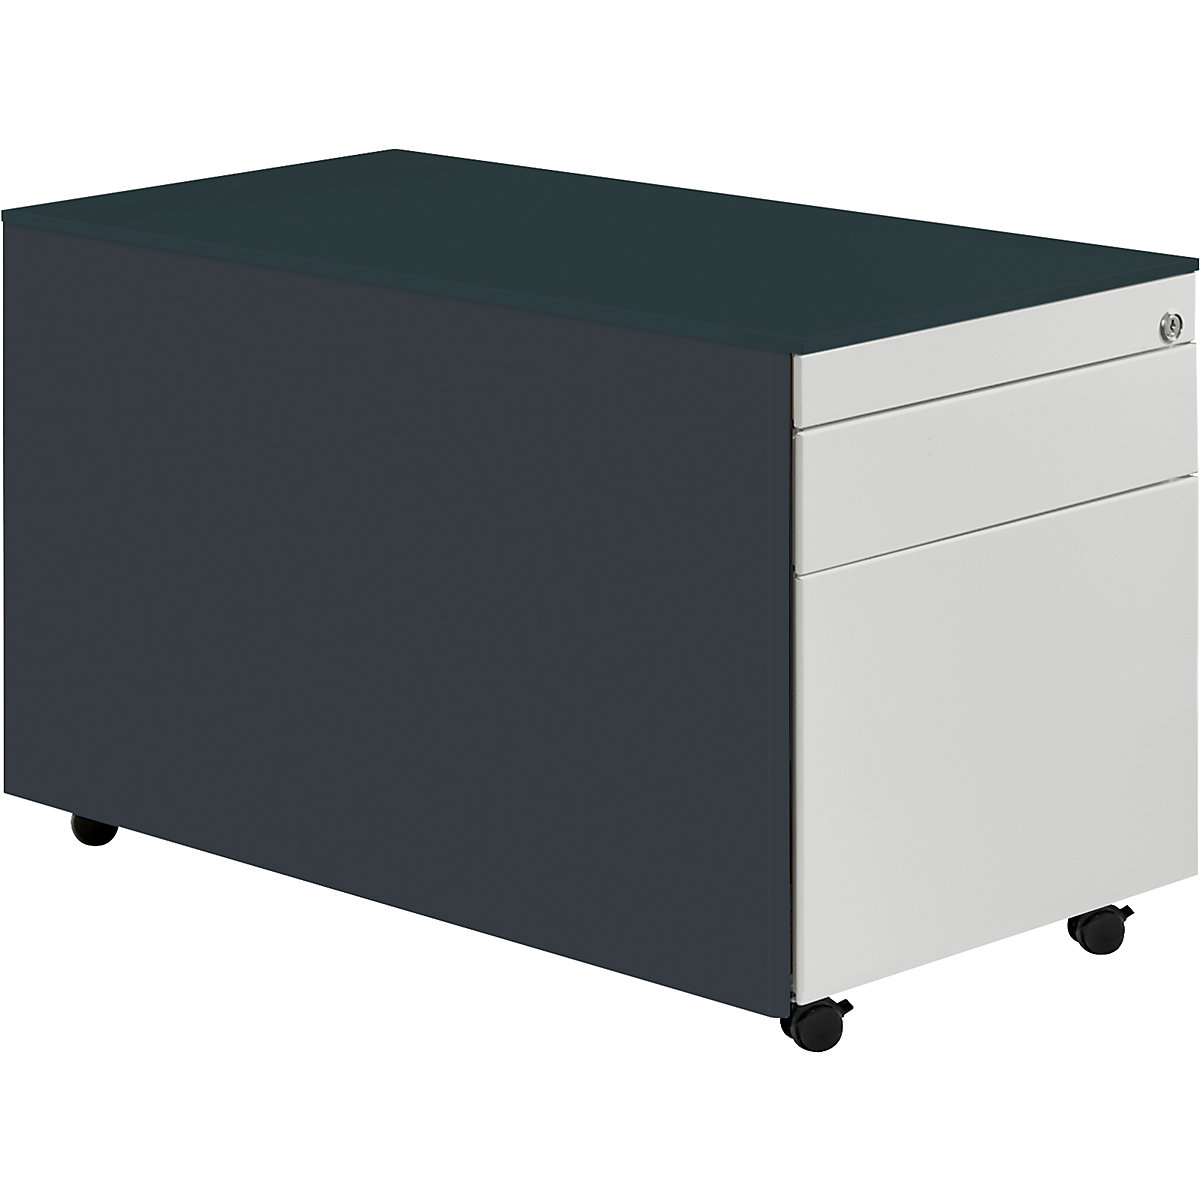 Drawer pedestal with castors – mauser, HxD 520 x 800 mm, 1 drawer, 1 suspension file drawer, charcoal / light grey / charcoal-3